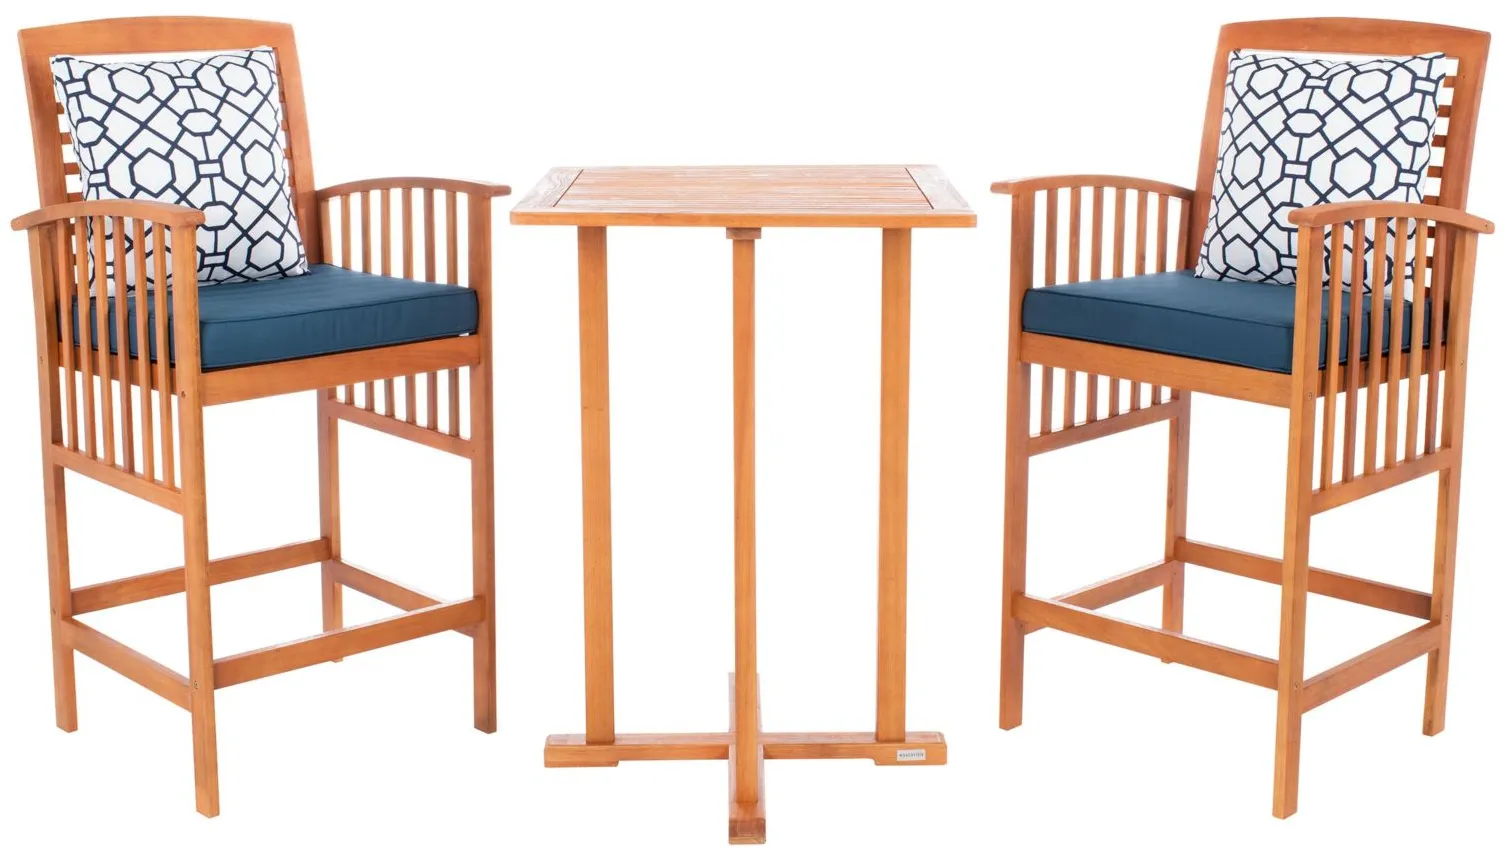 Davies 3-pc. Outdoor Pub Table Set in Natural / Navy by Safavieh